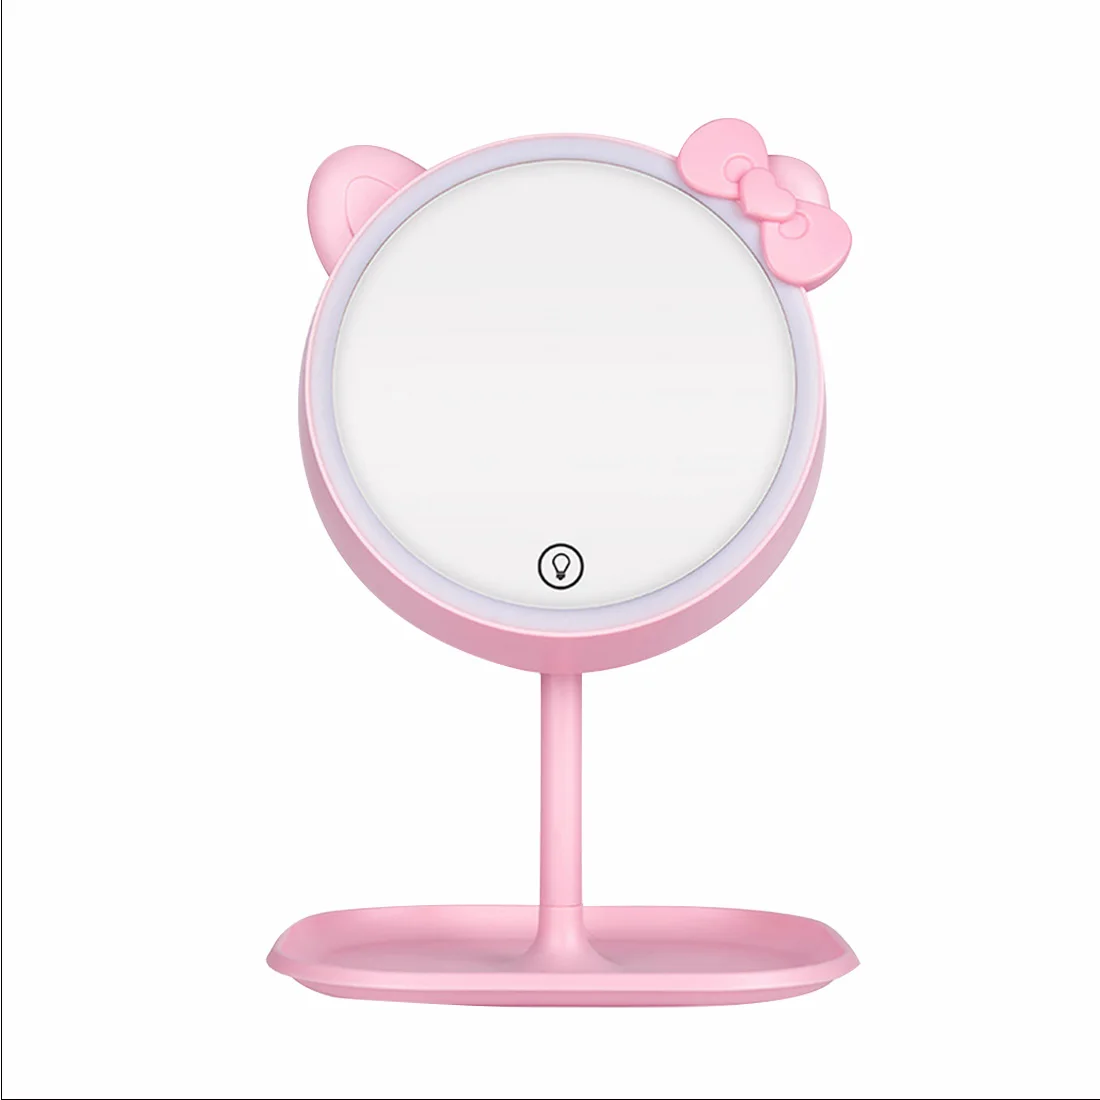 

CSHOU196 cat Ear Makeup Mirror With LED Adjustable Light Touch Screen USB LED Make Up Mirror Desk Vanity Cosmetic Storage Mirror